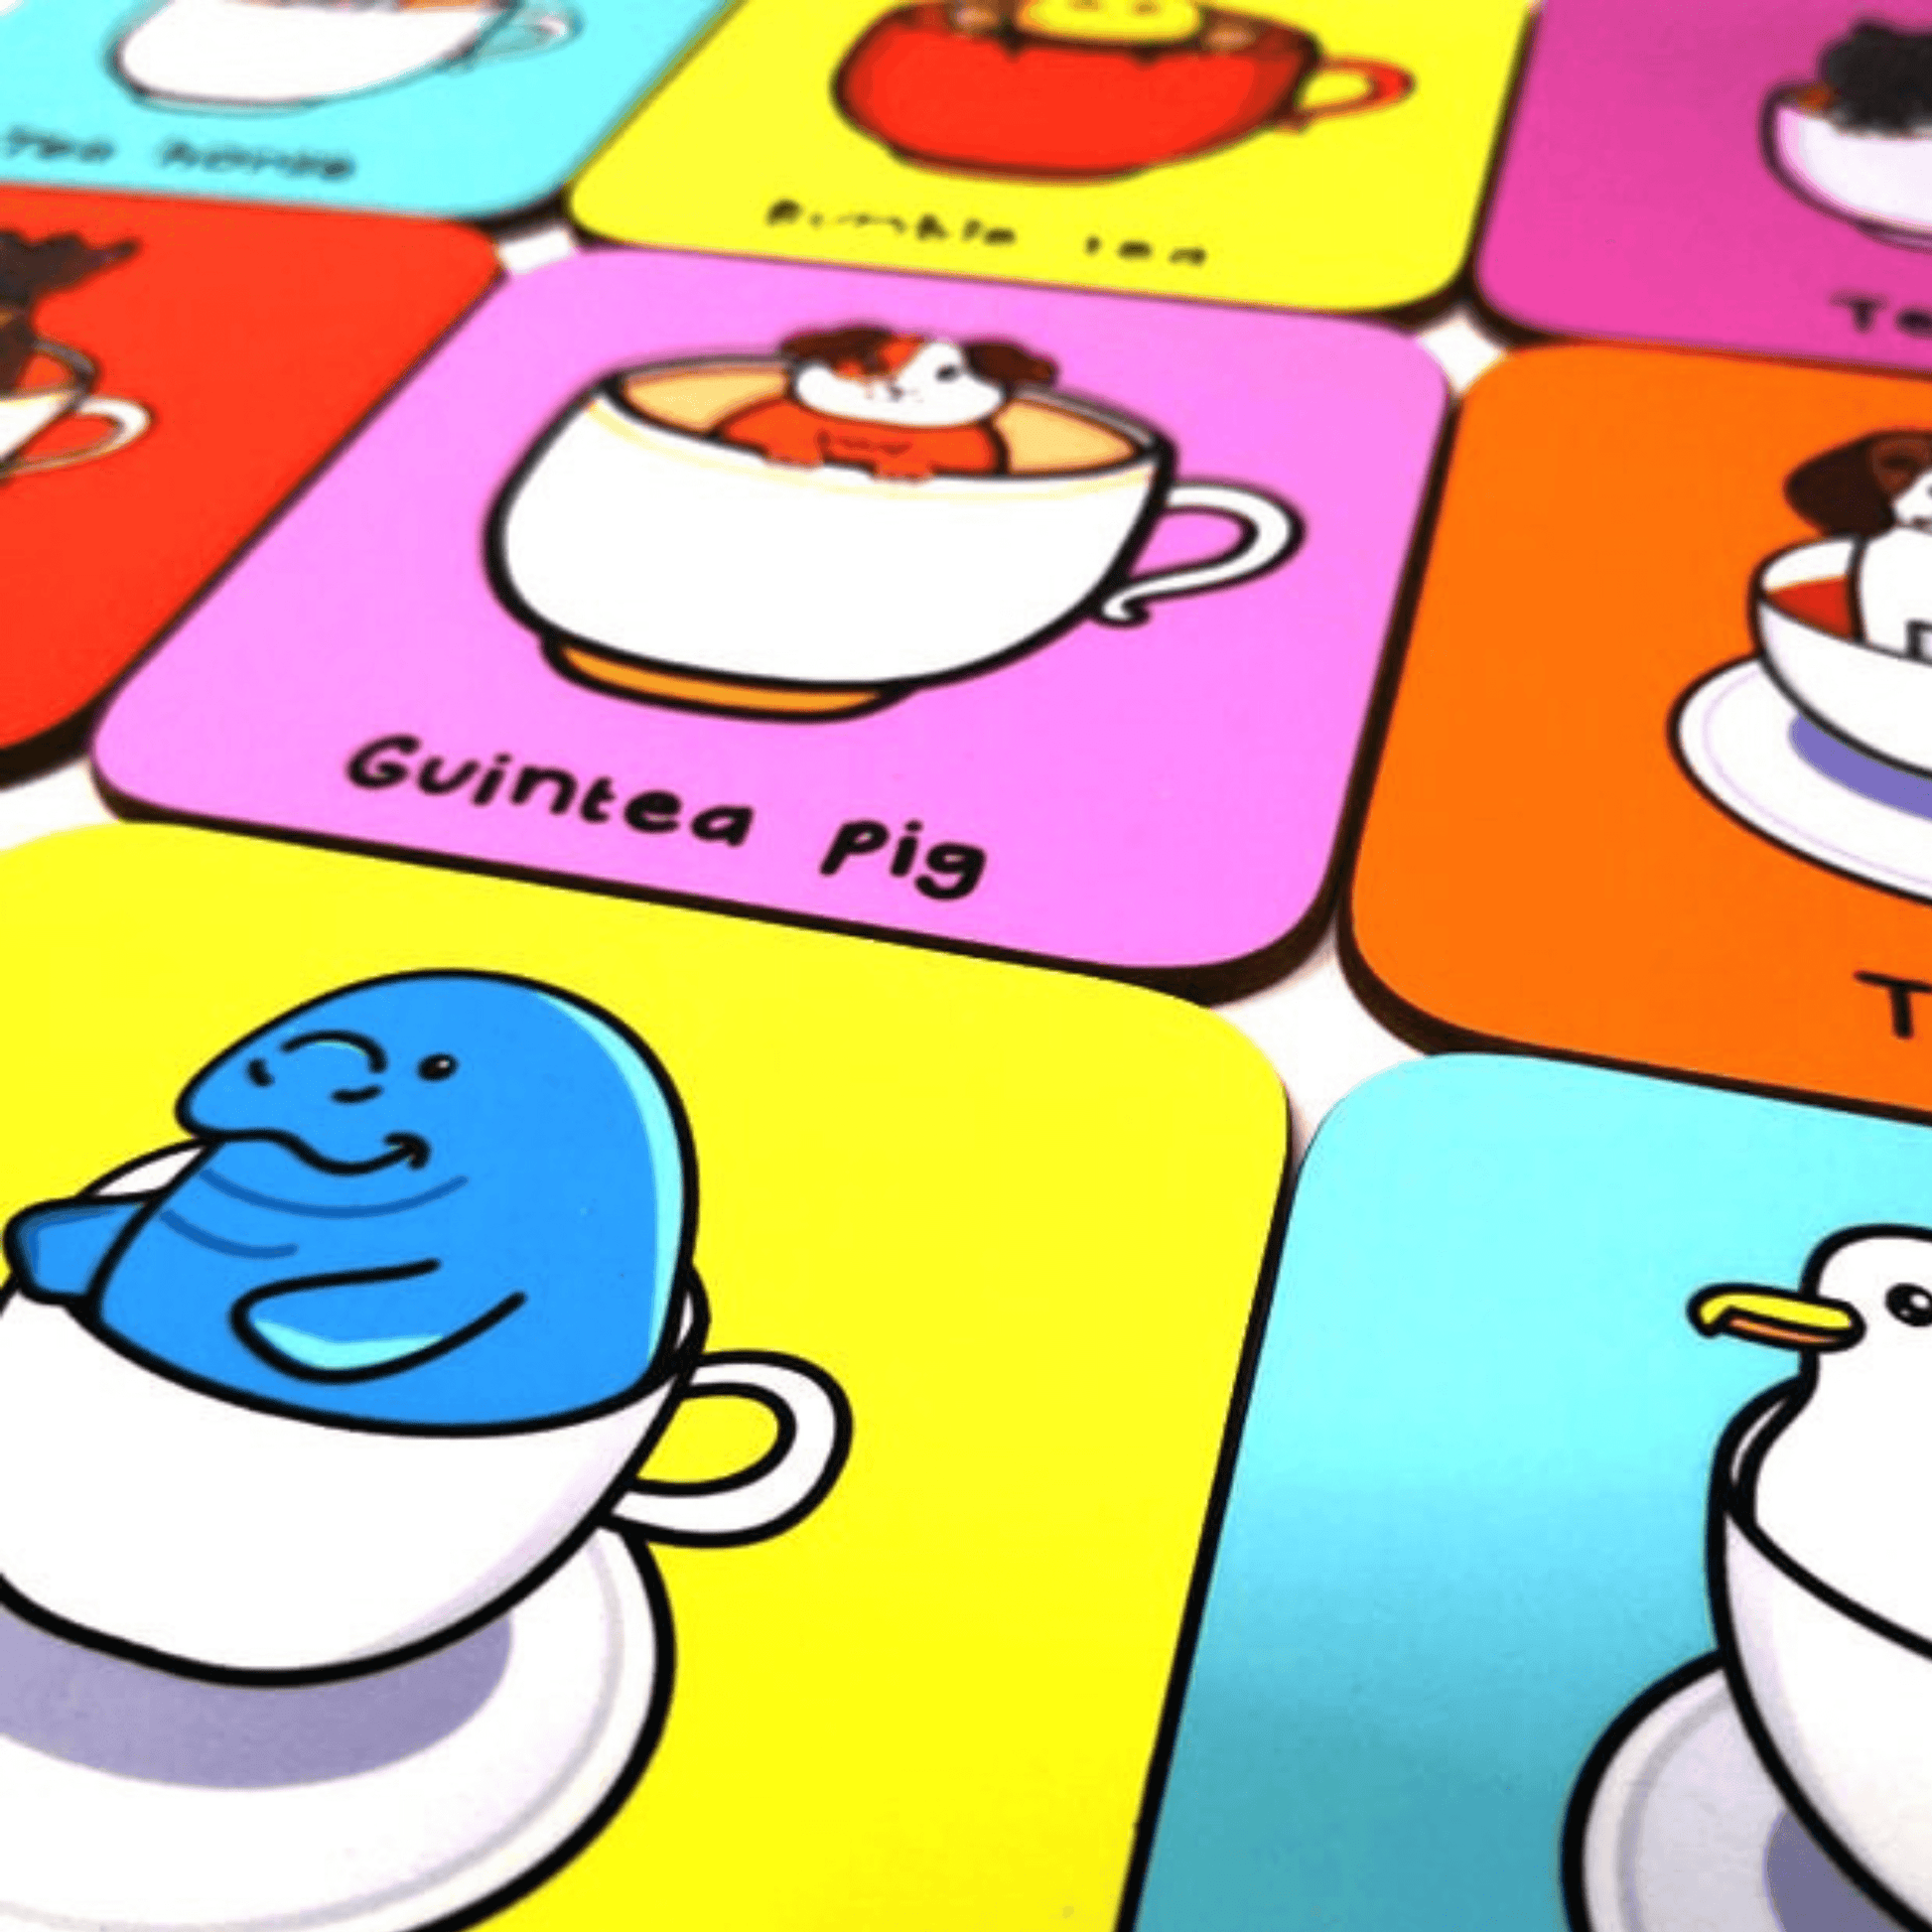 The Guinea Pig Tea Coaster amongst other innabox tea pun coasters. The pastel pink wooden coaster has a smiling brown and white guinea pig popping out of a white mug of tea, underneath in black reads 'guintea pig'.